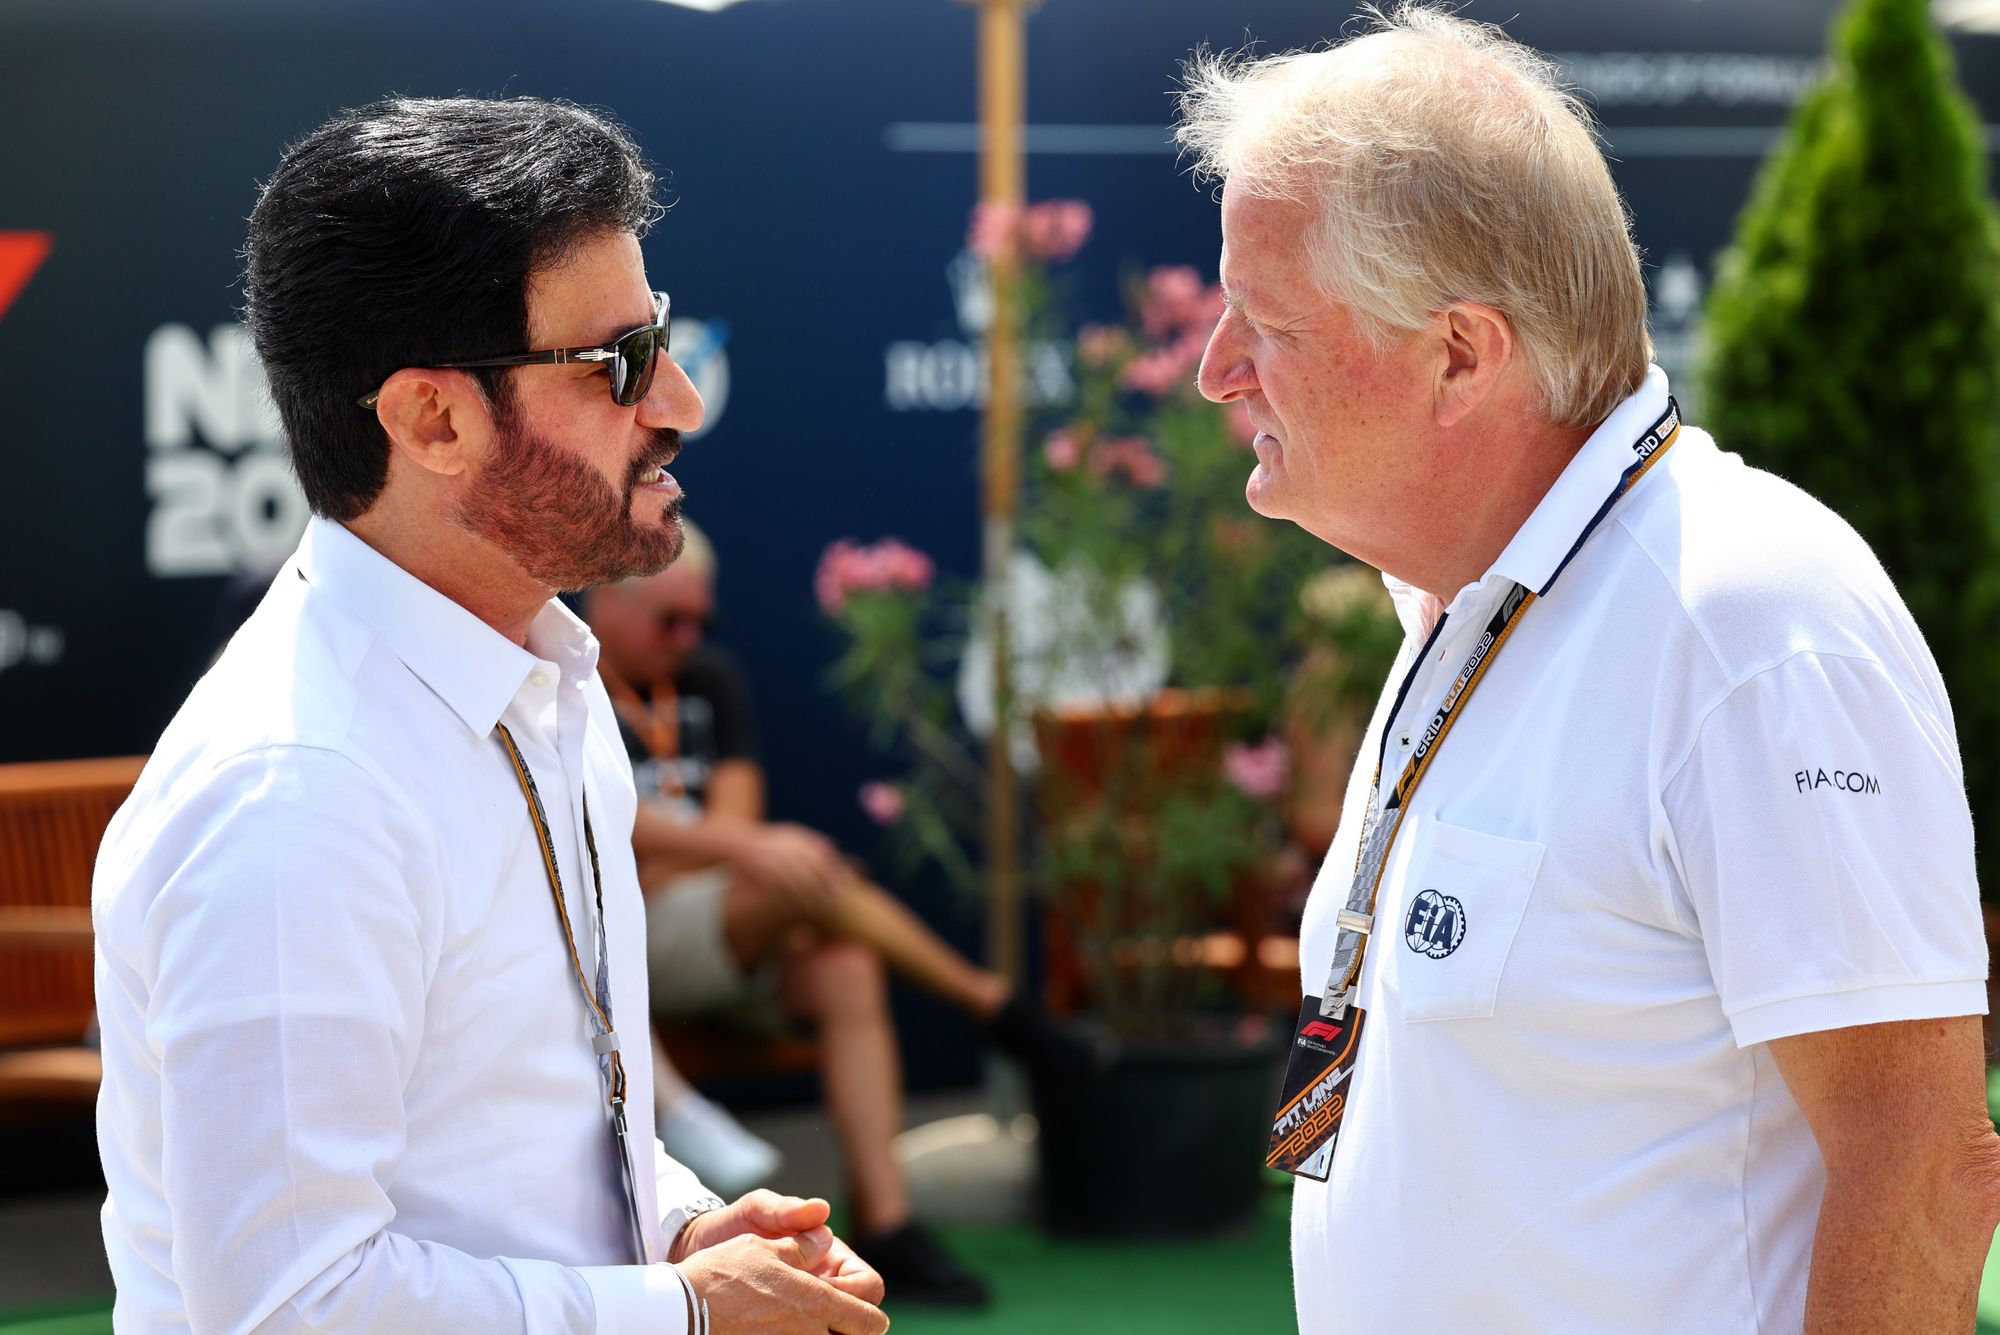 Mohammed Ben Sulayem and Jo Bauer, FIA